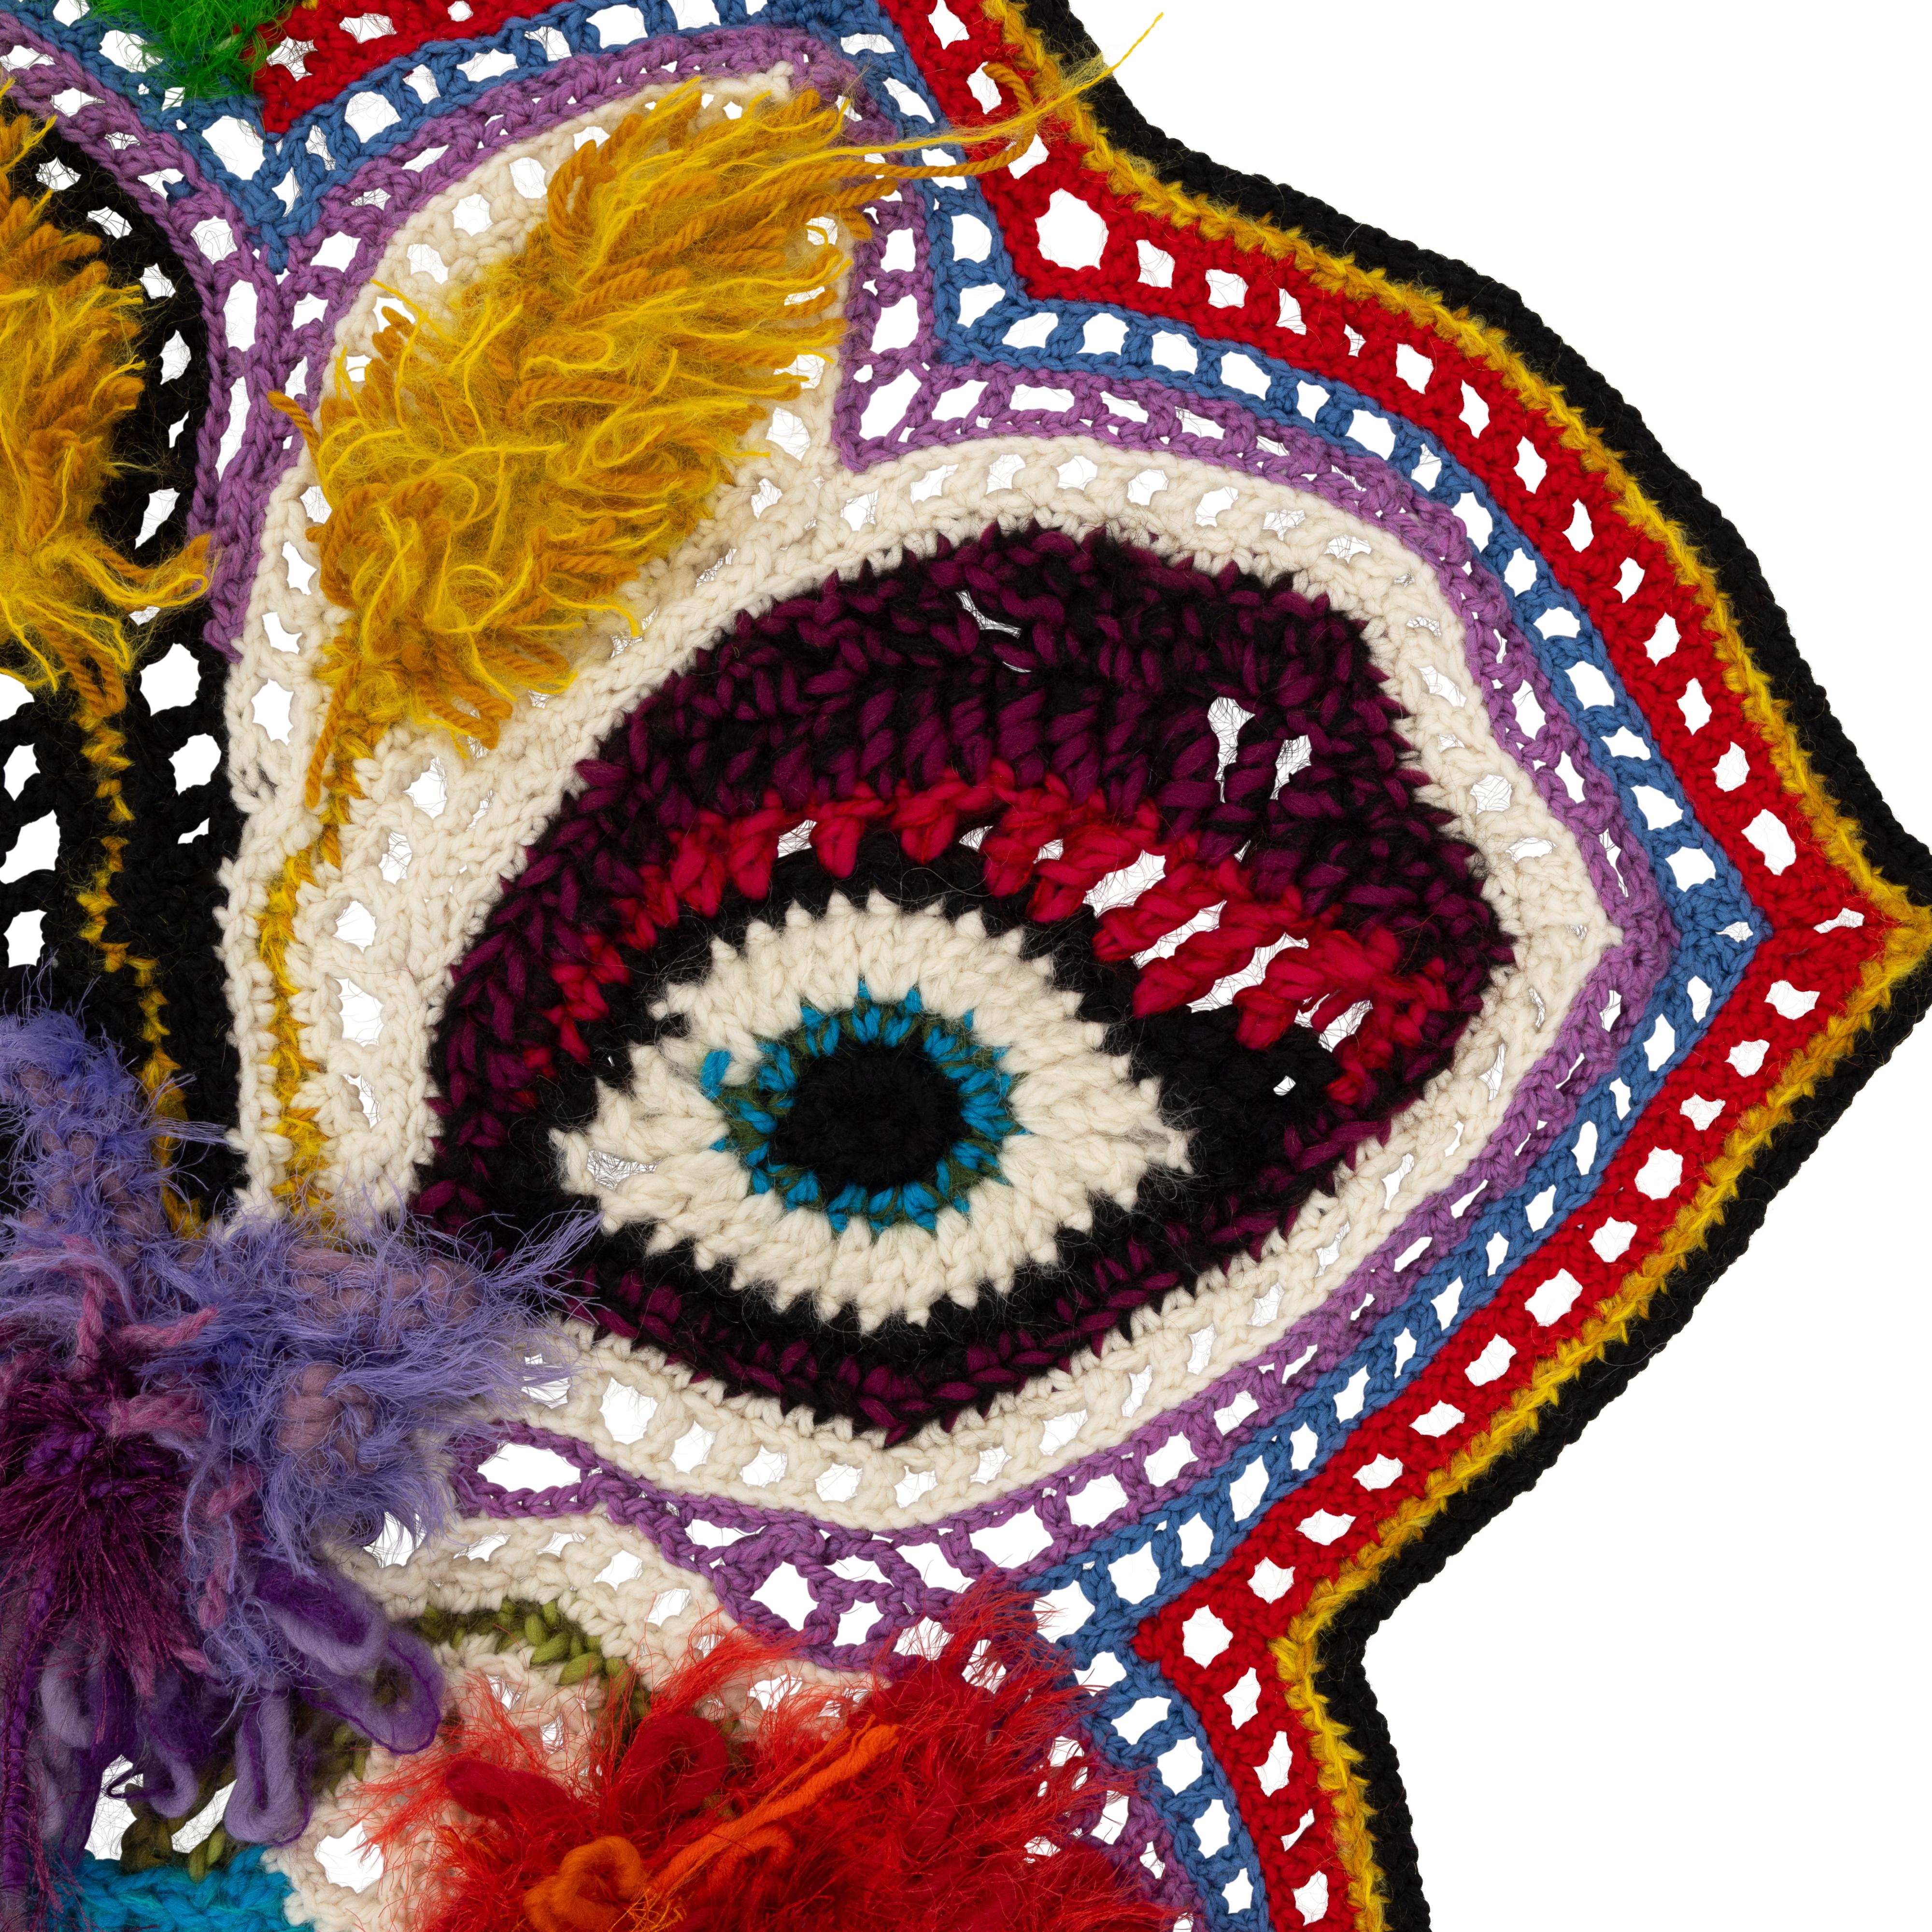 Textile Art, Hand-crafted, Crochet Art Blanket, Knitted Tapestry, Wall hanging, Affordable Art.
Multi coloured surreal vase with highly textured flowers including an eye alluding to a face . Luxurious blends of predominantly wool yarns are